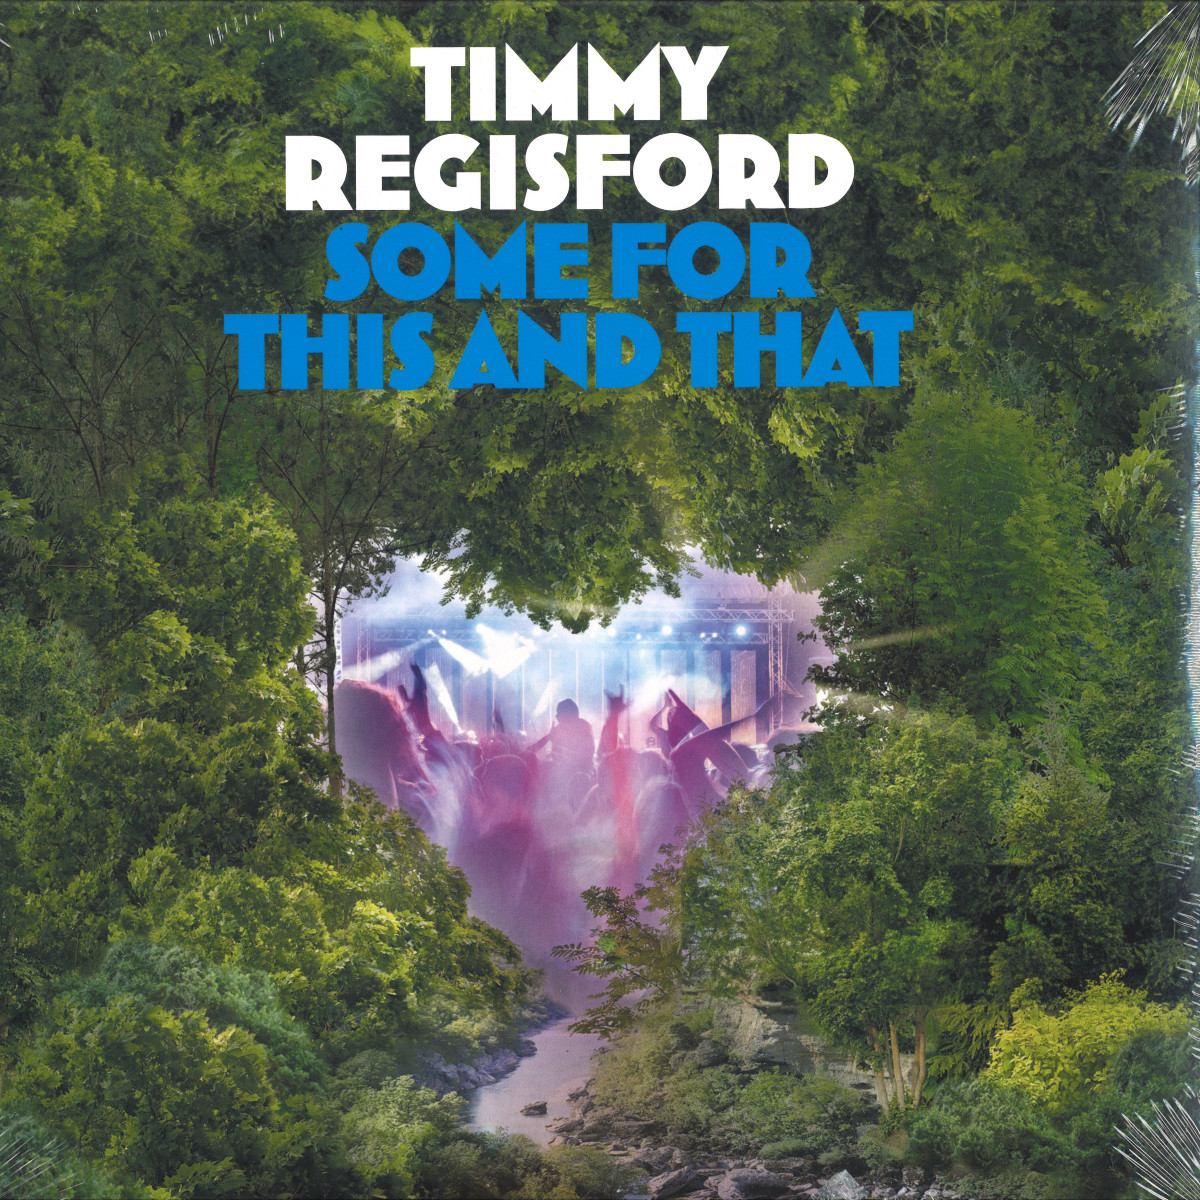 Timmy Regisford – Some For This & That